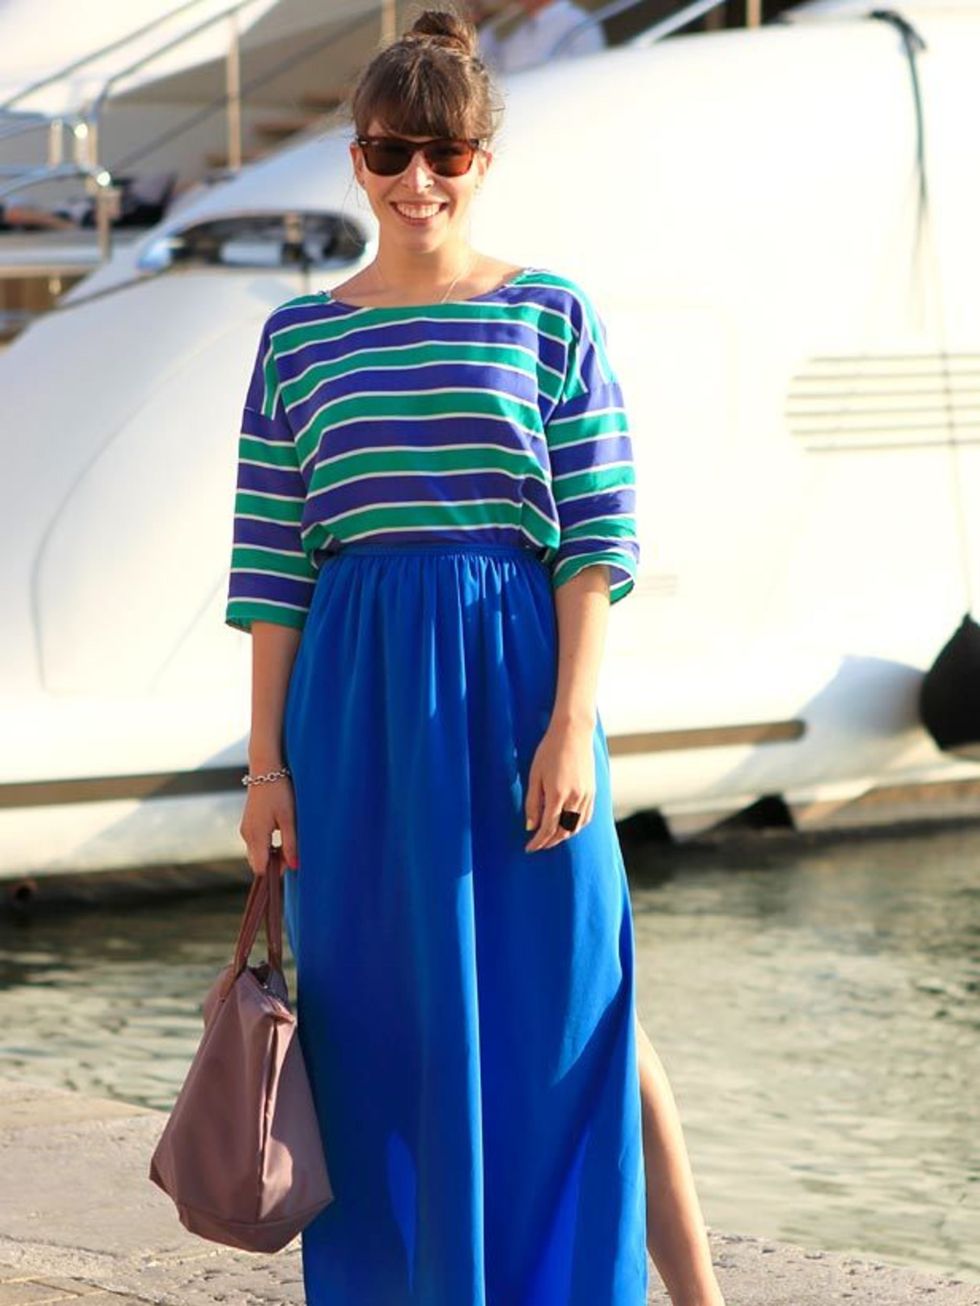 <p>Photo by Anthea Simms.Isabelle, 22, Student. Zara top, skirt, shoes and bag, Rayban sunglasses.</p>